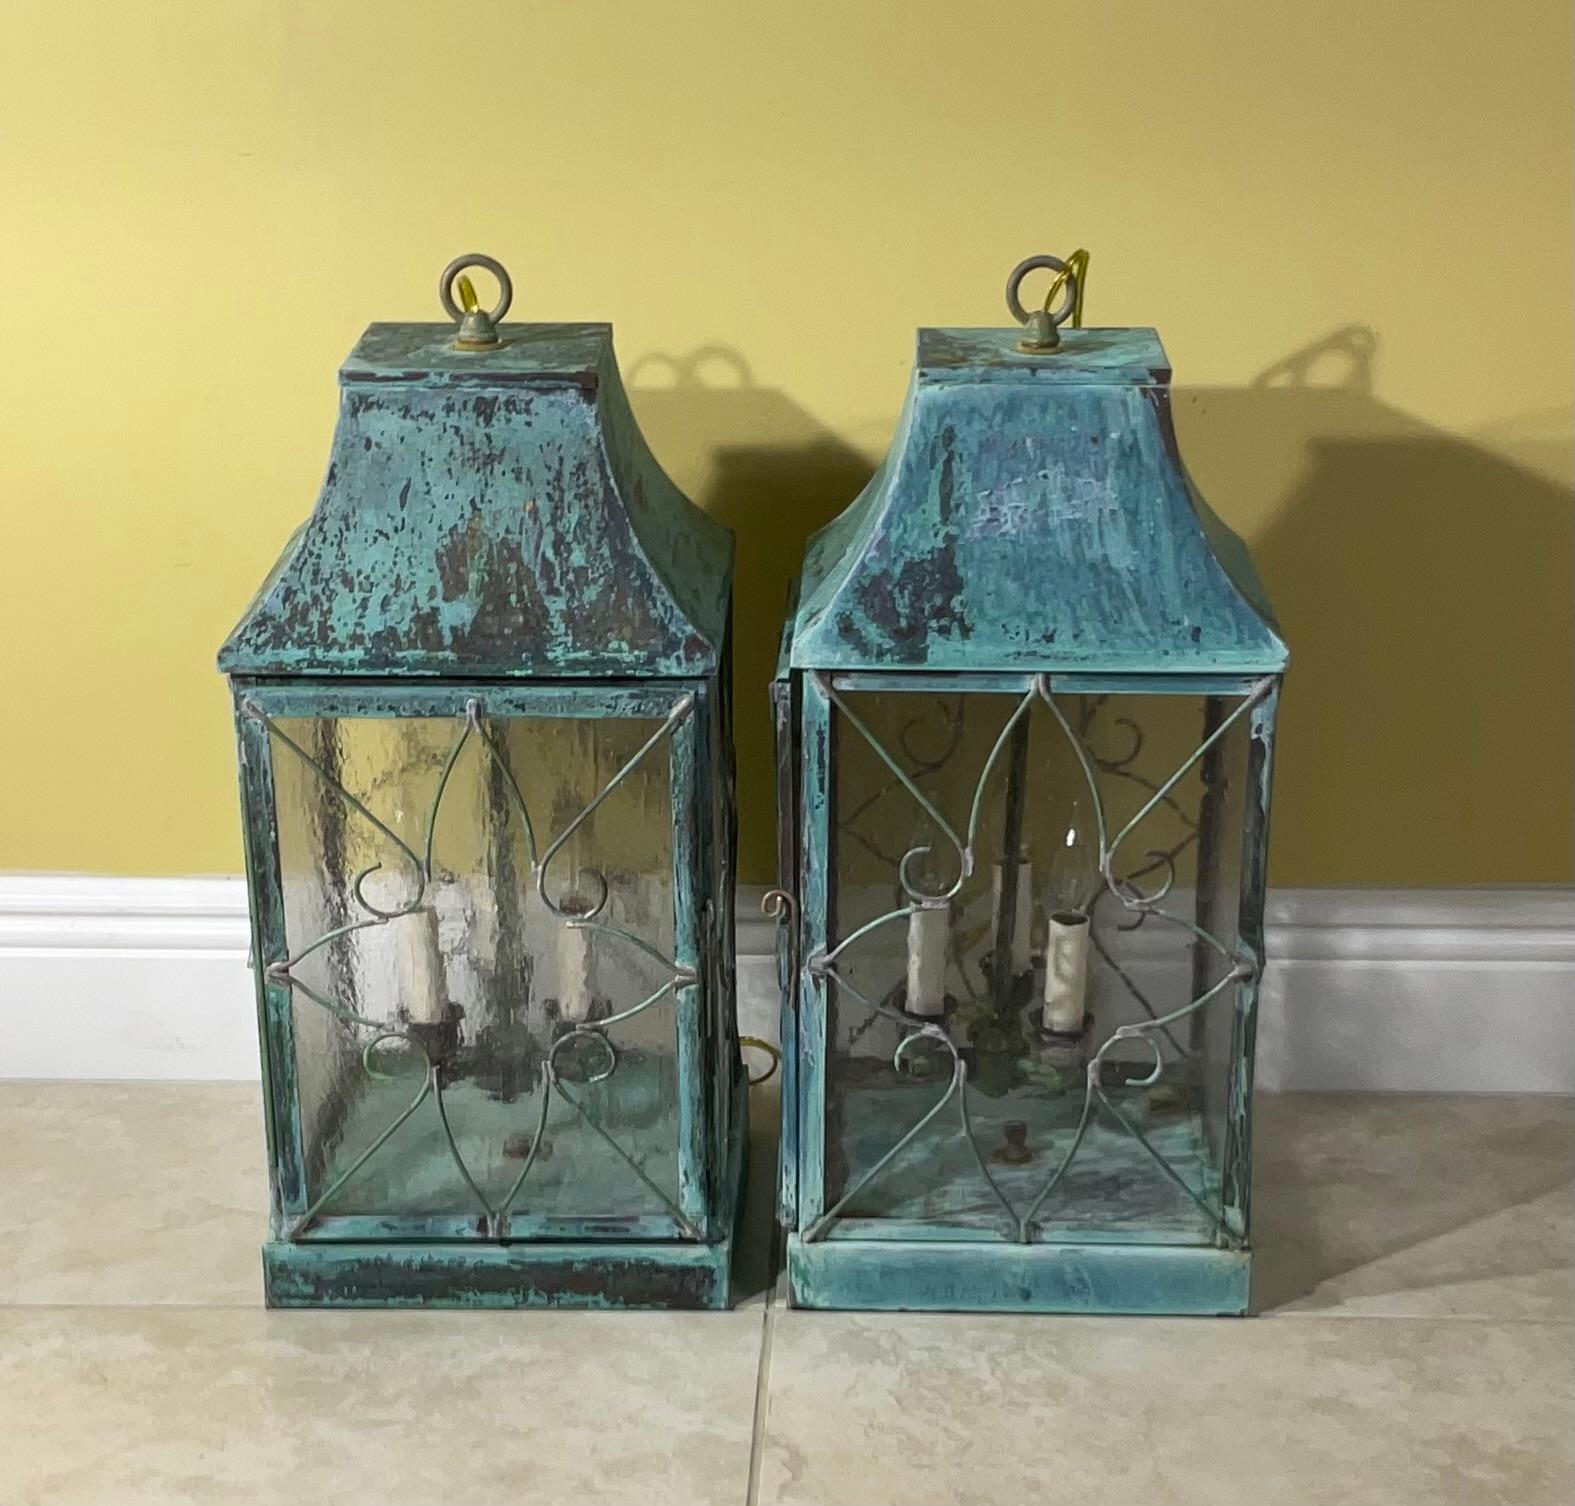 Pair Of Vintage Square Handcrafted Copper Hanging Lanterns For Sale 9